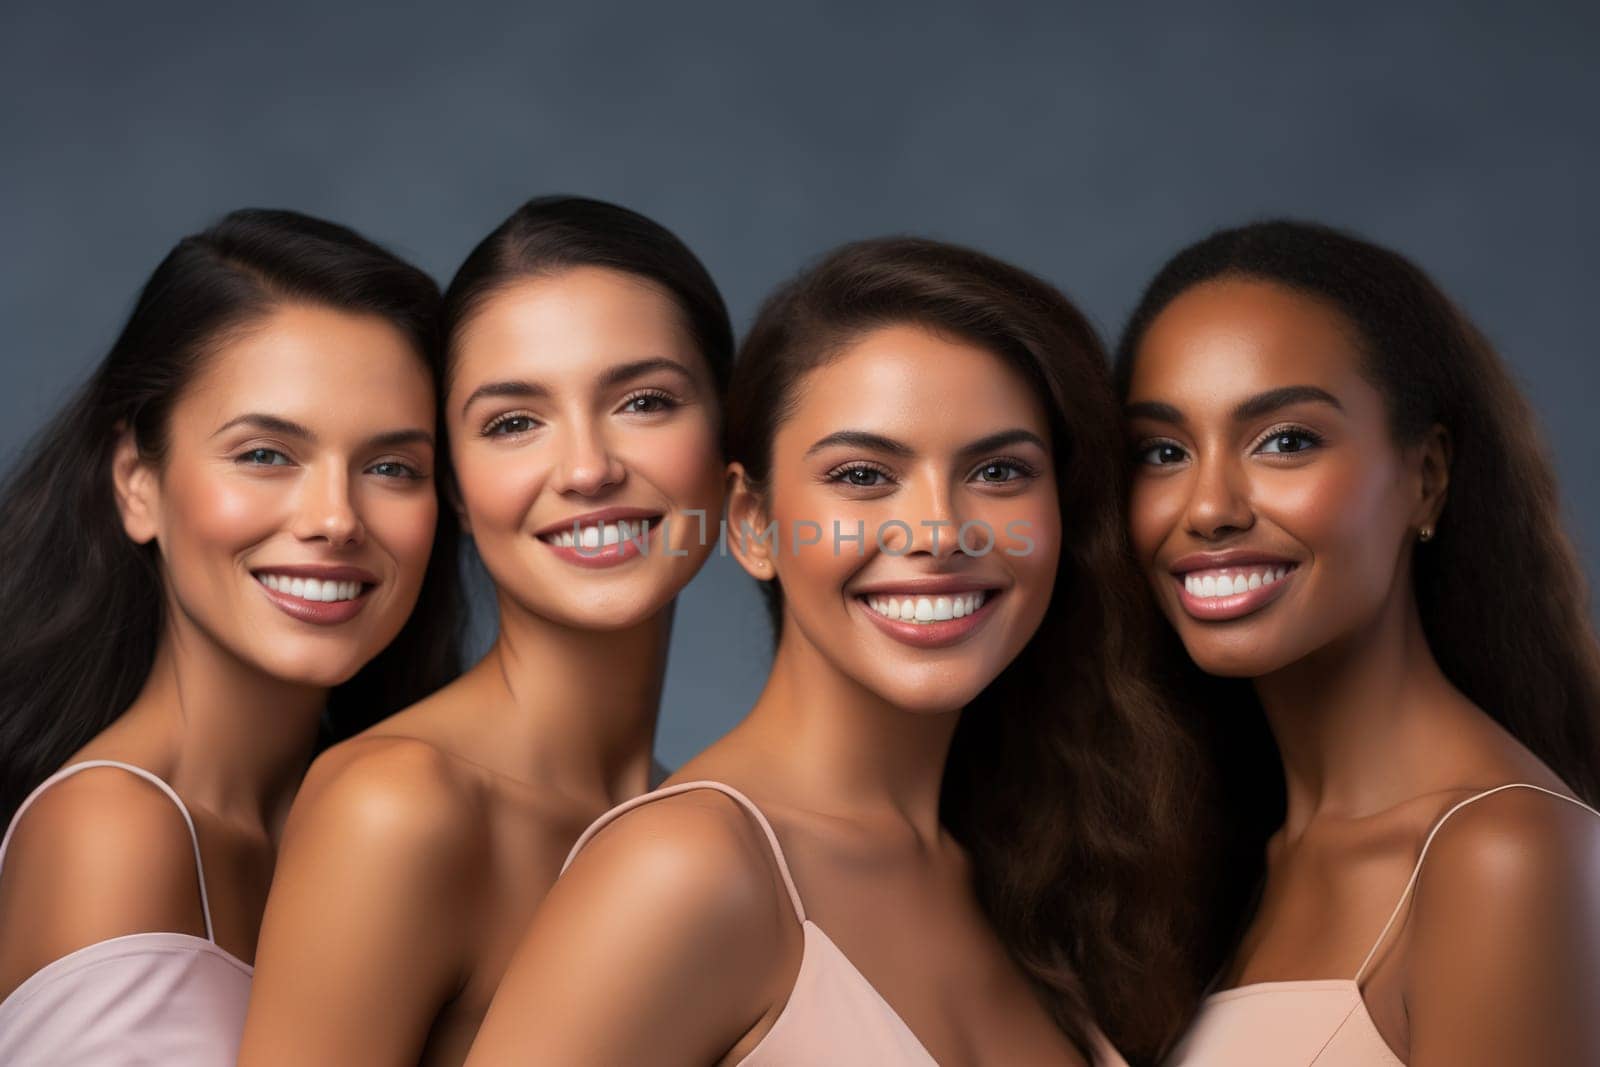 Beautiful girls with different skin colors. Model by Yurich32